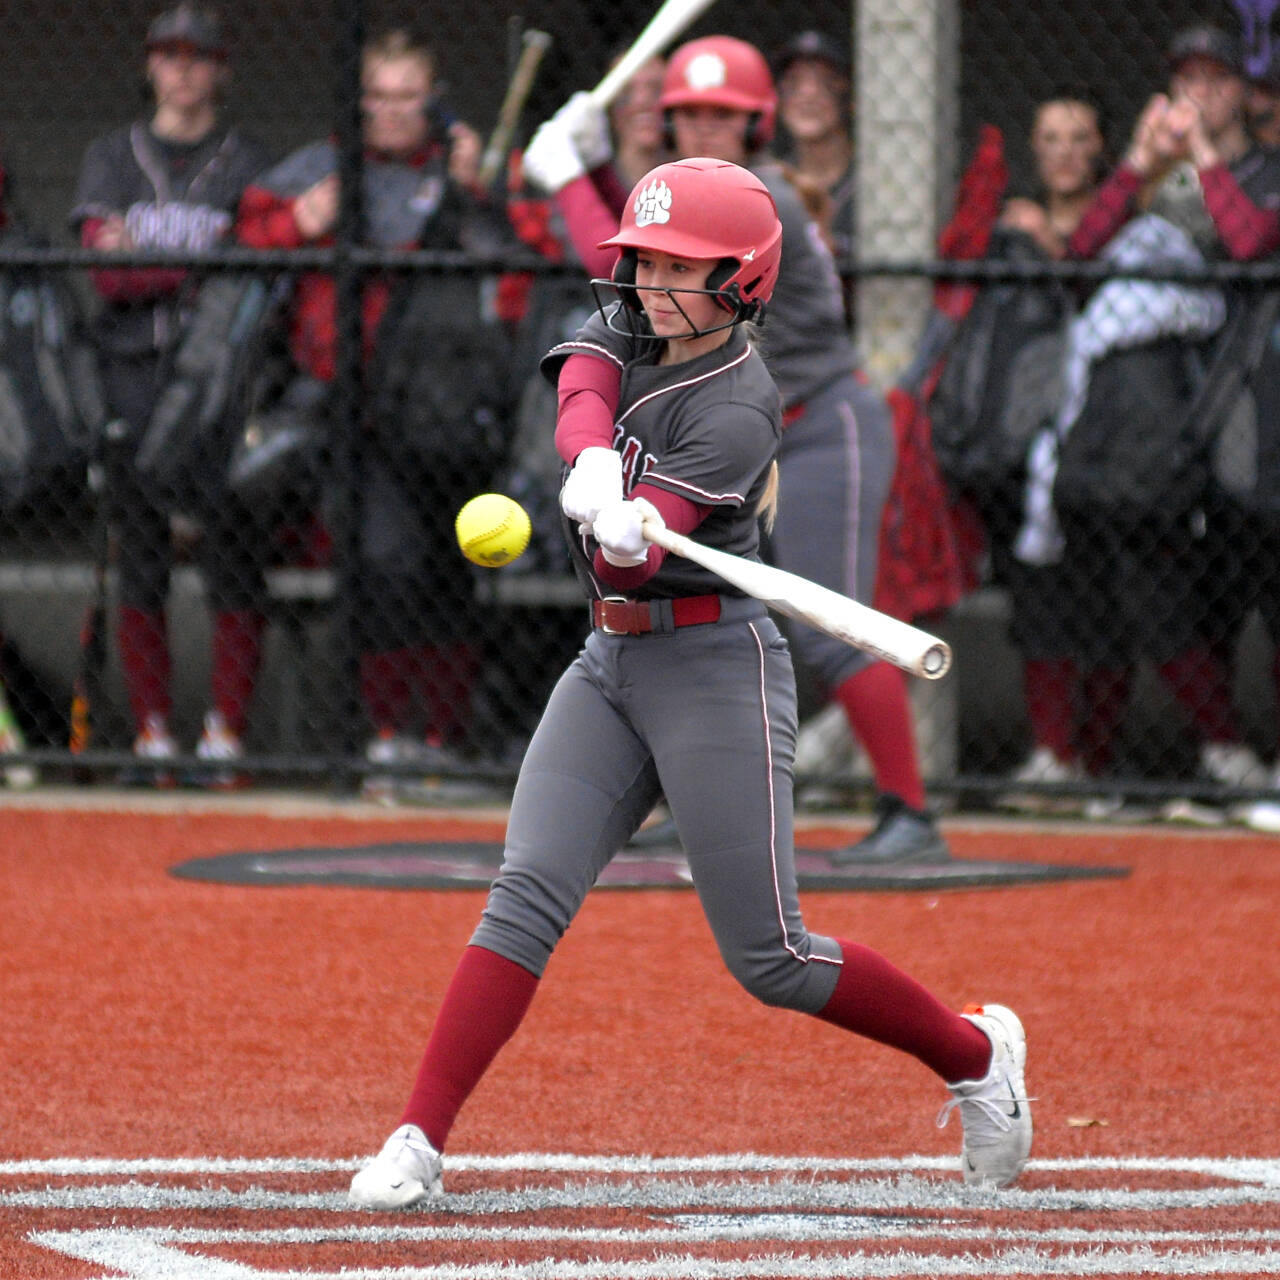 DAILY WORLD FILE PHOTO Hoquiam second baseman Ella Folkers had four hits, scored four runs and drove in four runs in a 21-2 thrashing over Tenino on Thursday in Tenino.